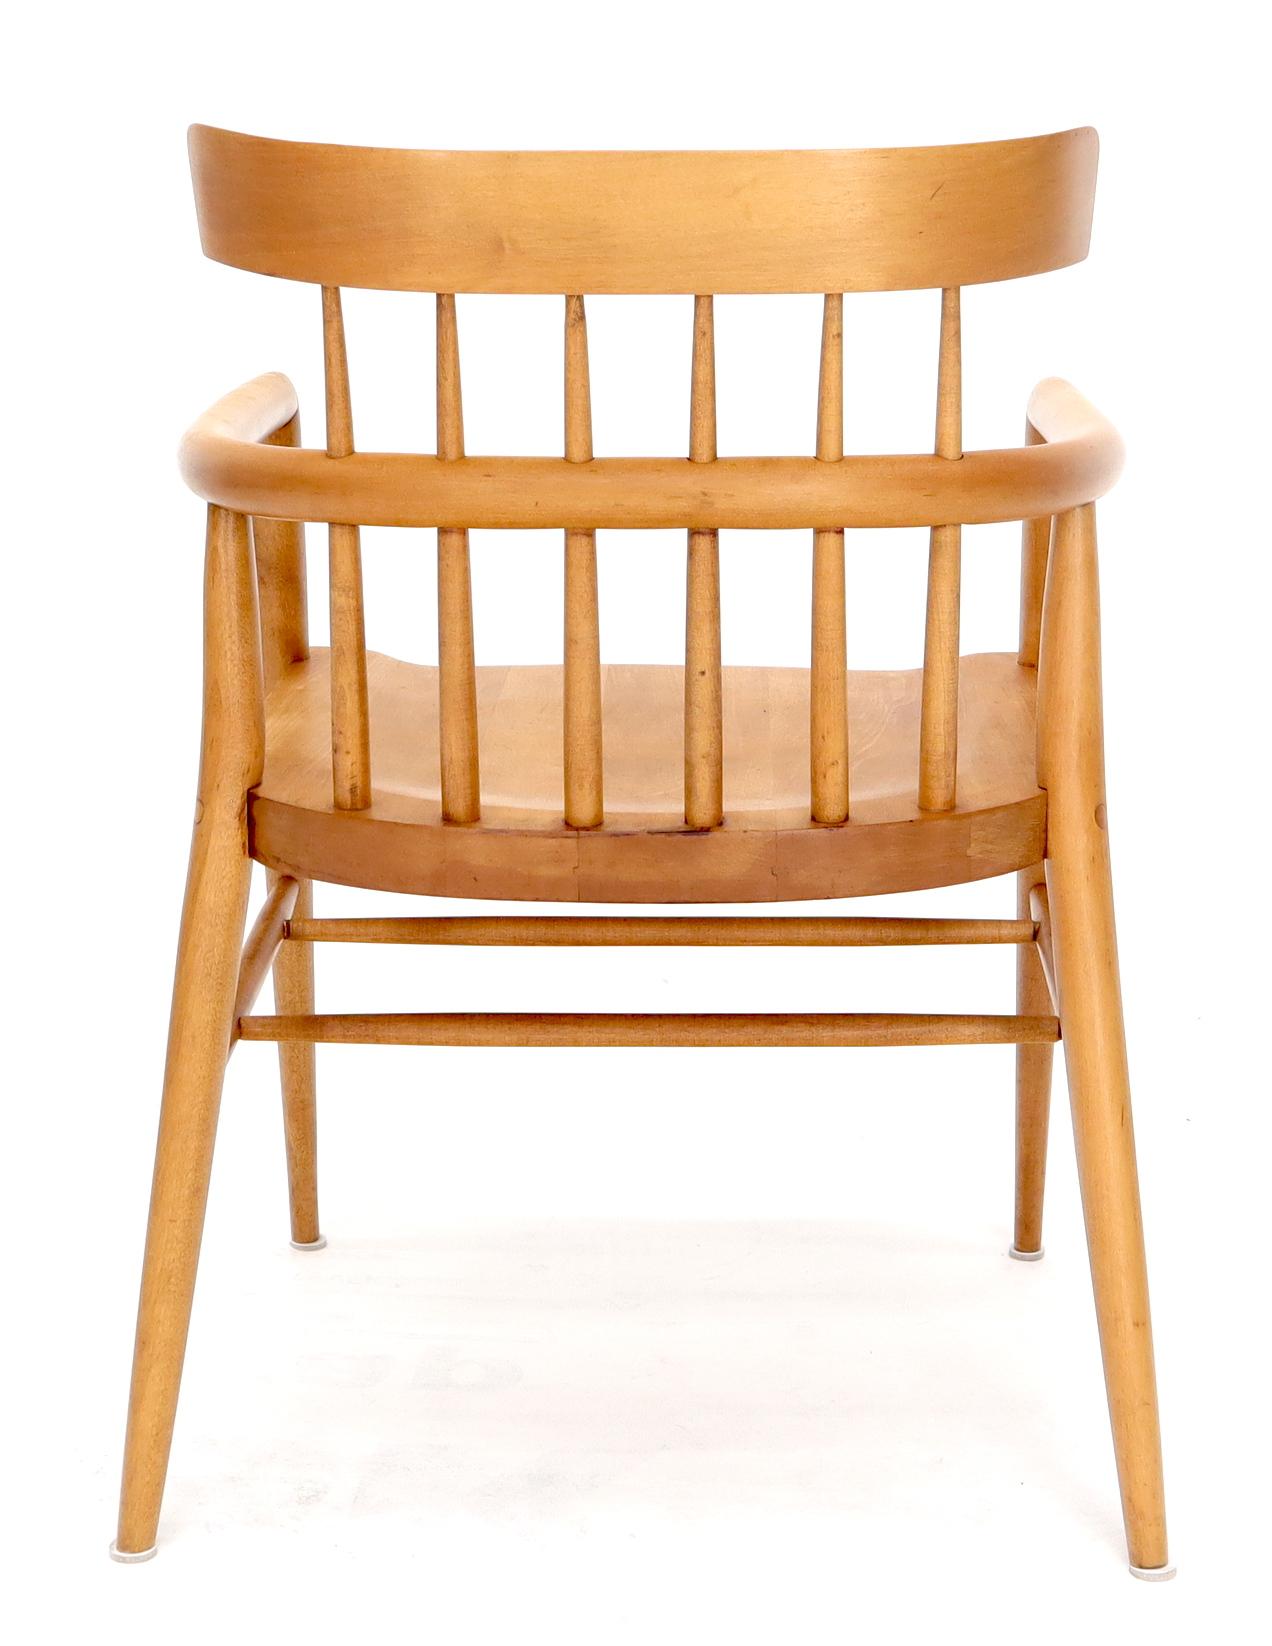 20th Century Solid Birch Barrel Back Bent Wood Spindle Back Armchair Desk Chair For Sale